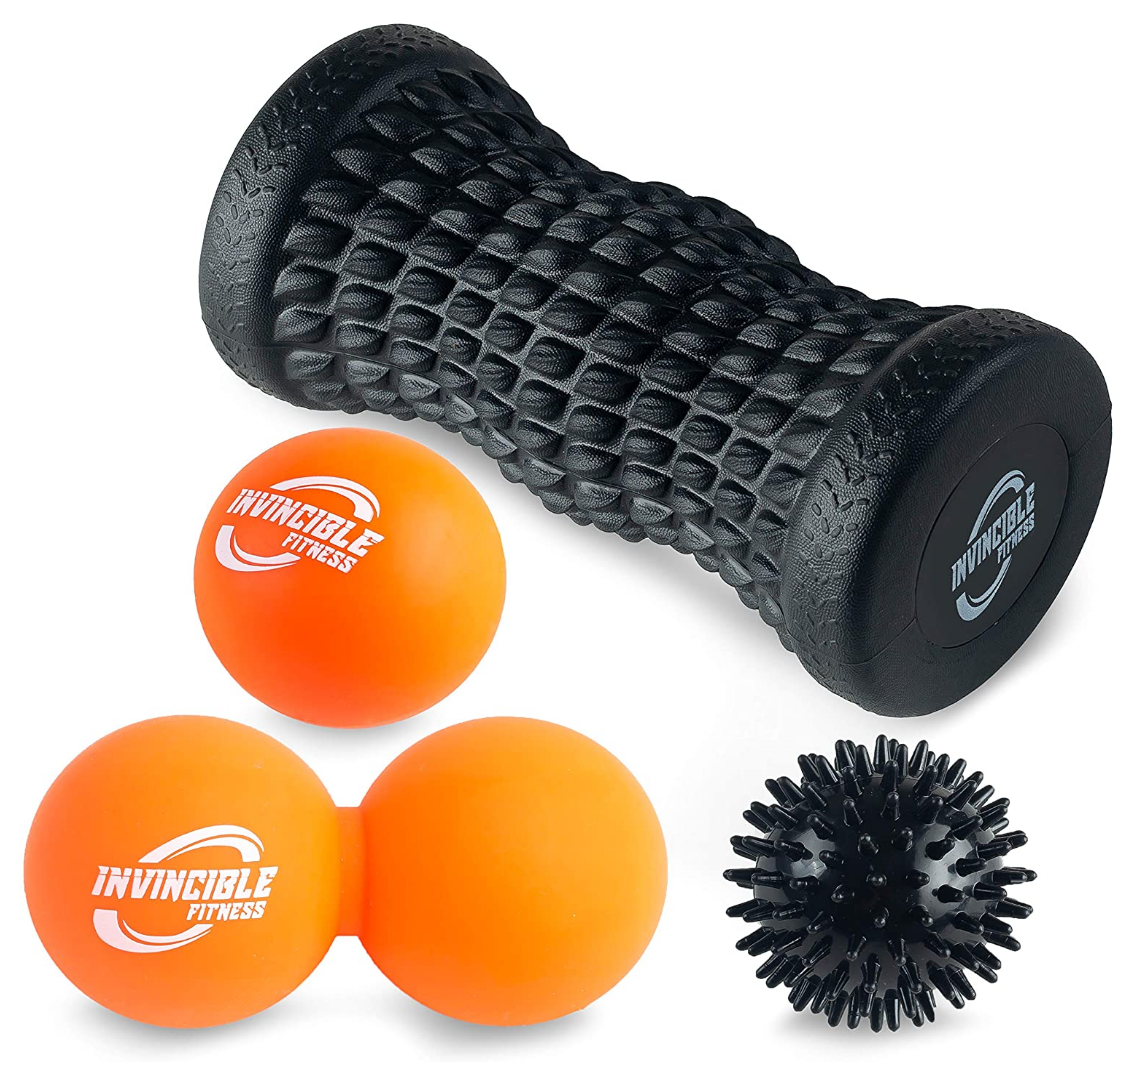 Invincible Fitness Massage Ball & Foot Roller 4-in-1 Set Review